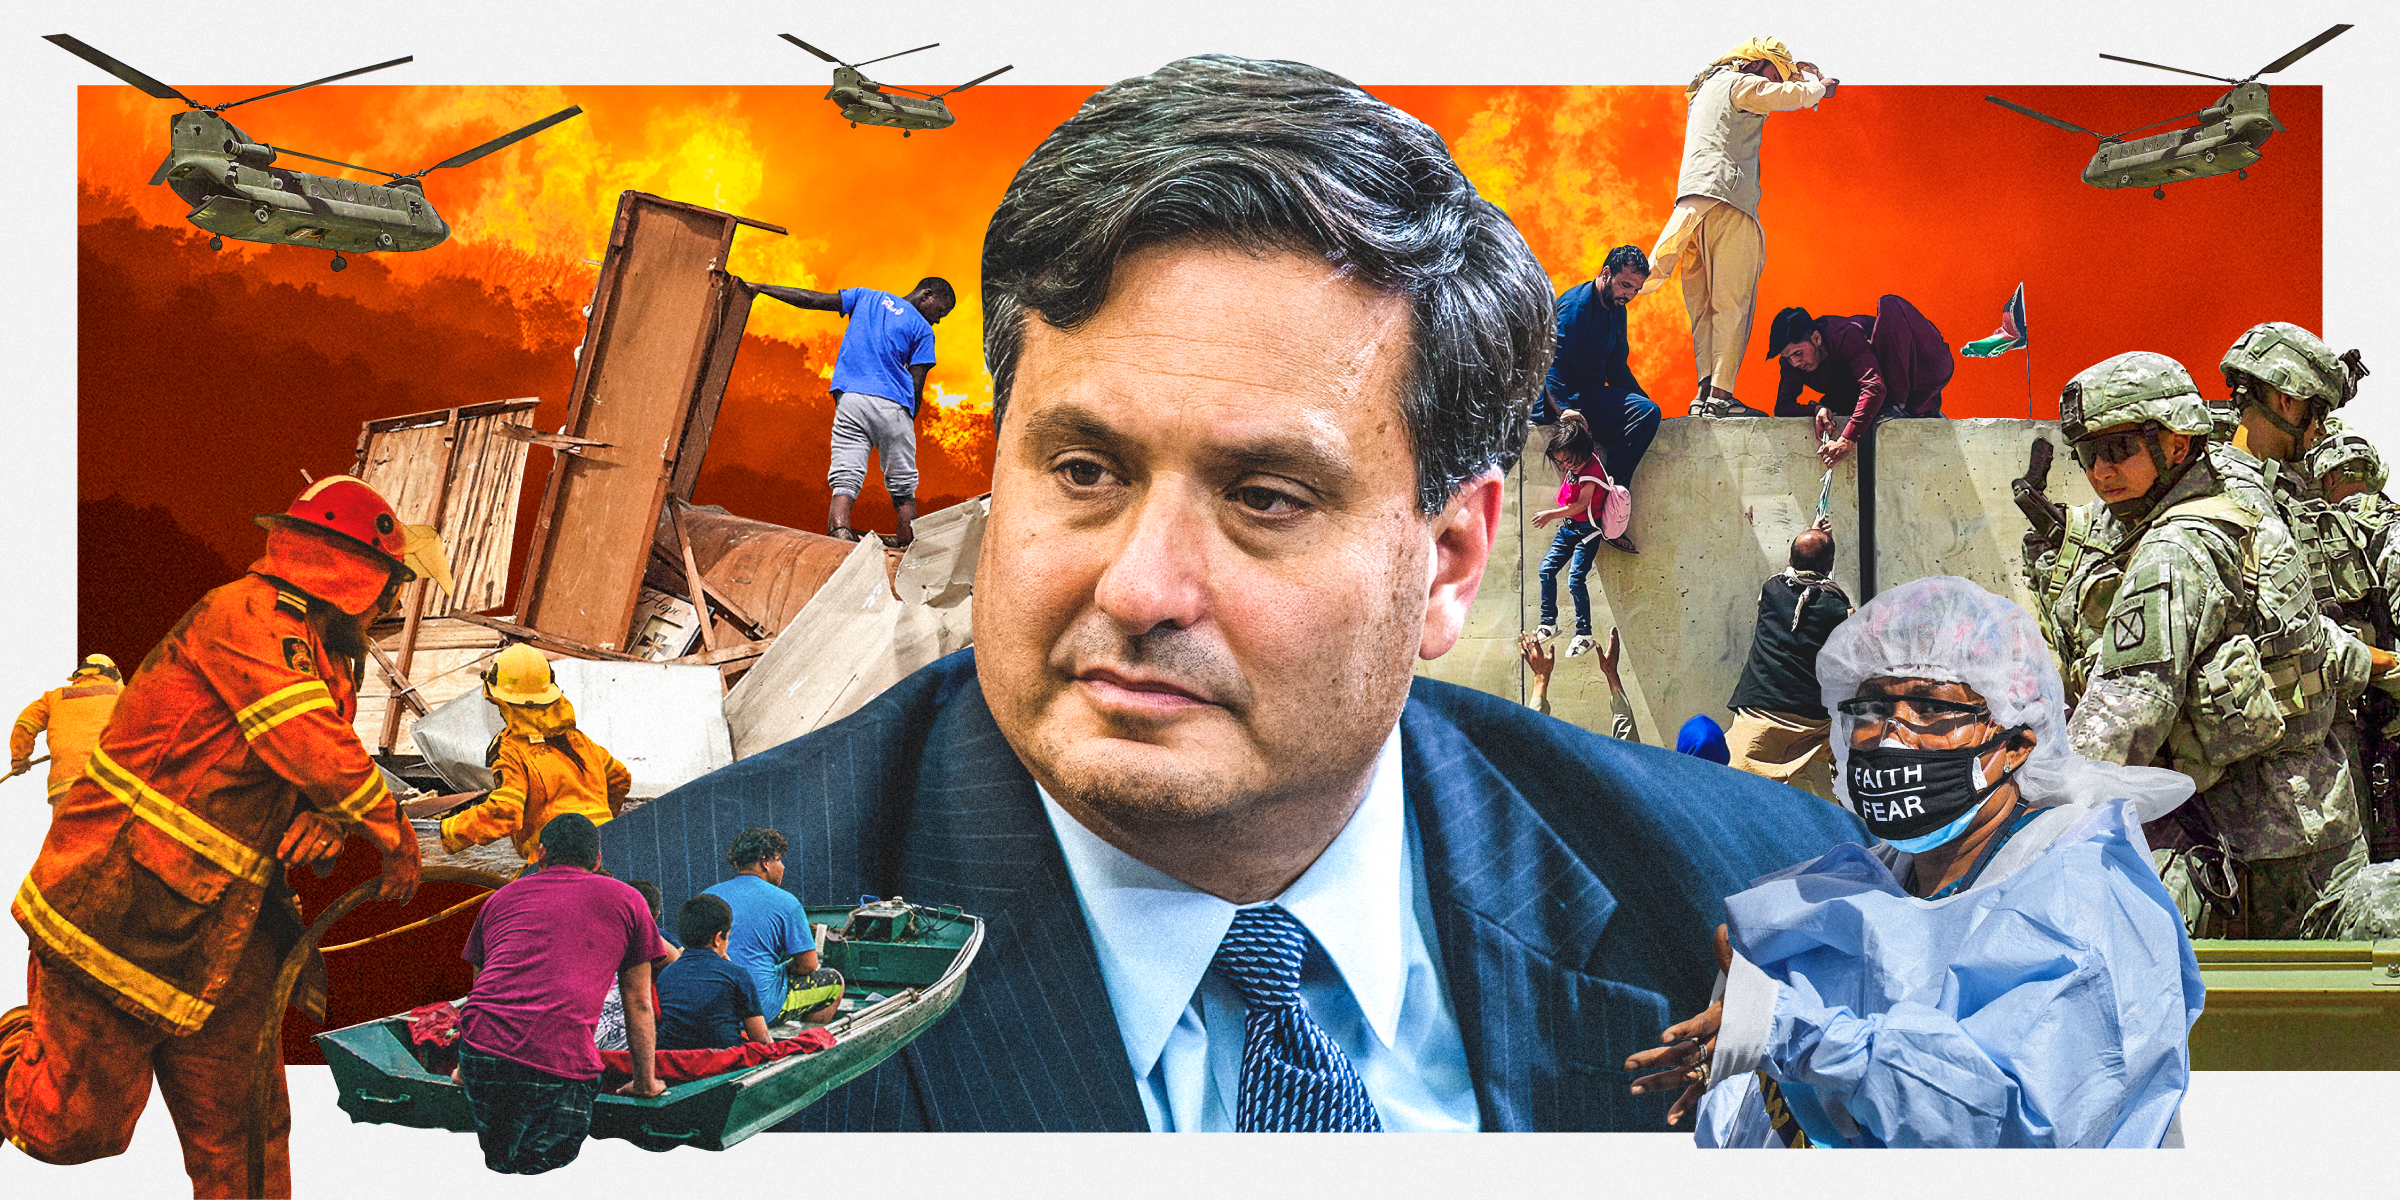 White House Chief of Staff, Ron Klain, with firefighters, Hurricane Ida victims, fleeing Afghanis, American military troops, and a nurse in PPE around him with military Chinook helicopters in the air and a large wildfire in the background.